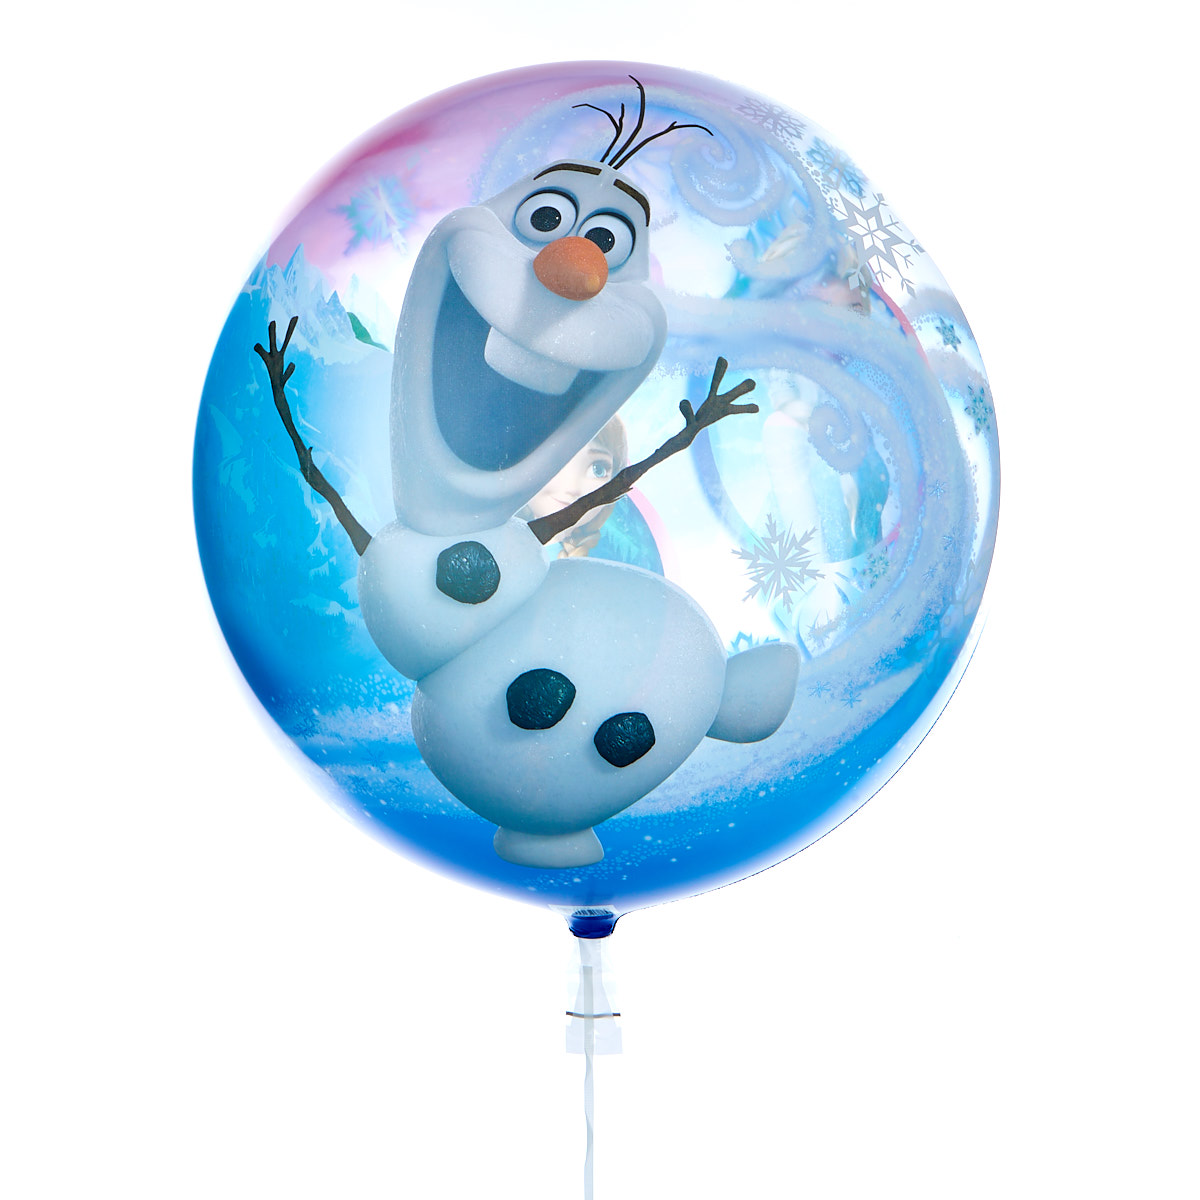 22 Inch Bubble Balloon - Disney's Frozen - DELIVERED INFLATED!